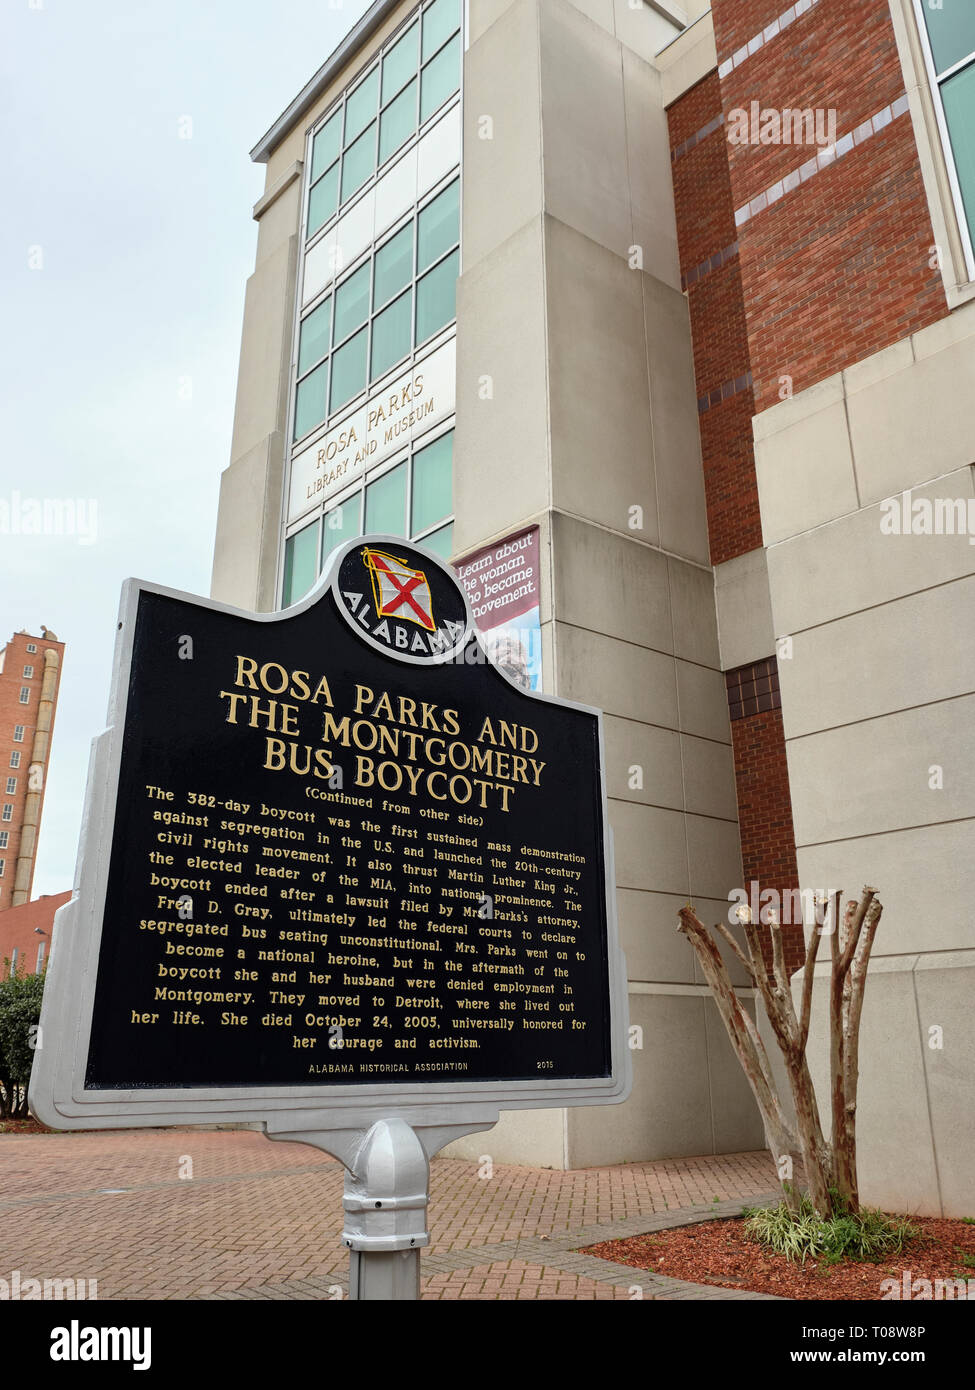 Rosa Parks bus boycott historical marker in front of the Rosa Parks Library and Museum in Montgomery Alabama, USA. Stock Photo